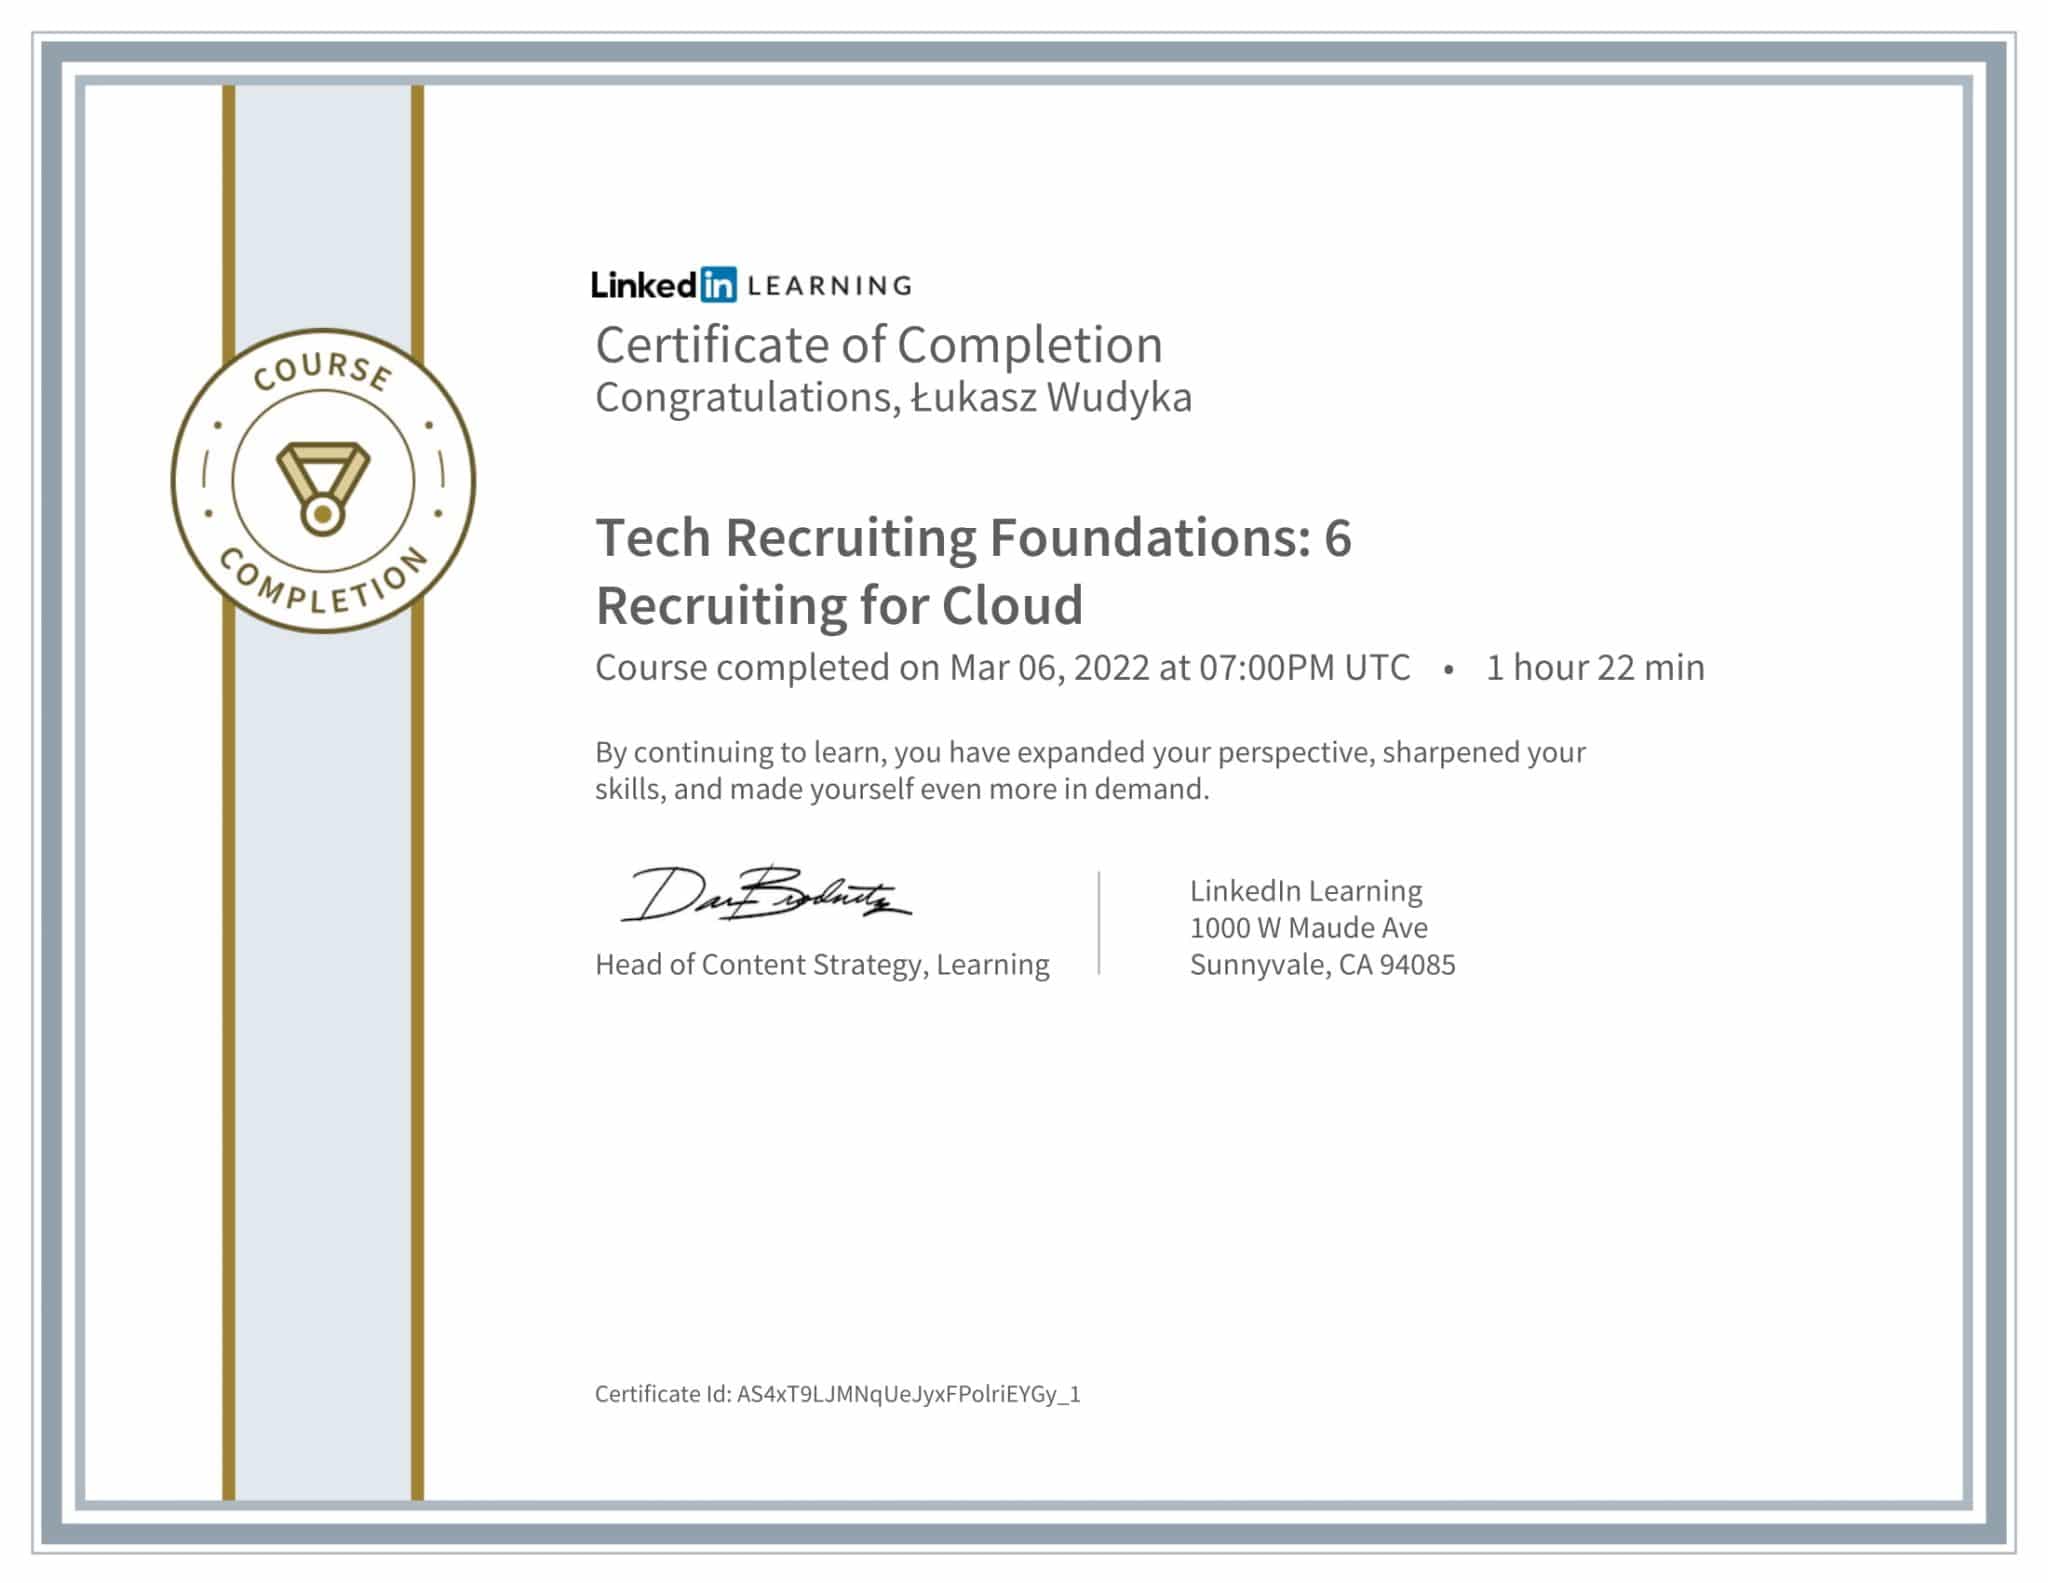 CertificateOfCompletion_Tech Recruiting Foundations 6 Recruiting for Cloud-1